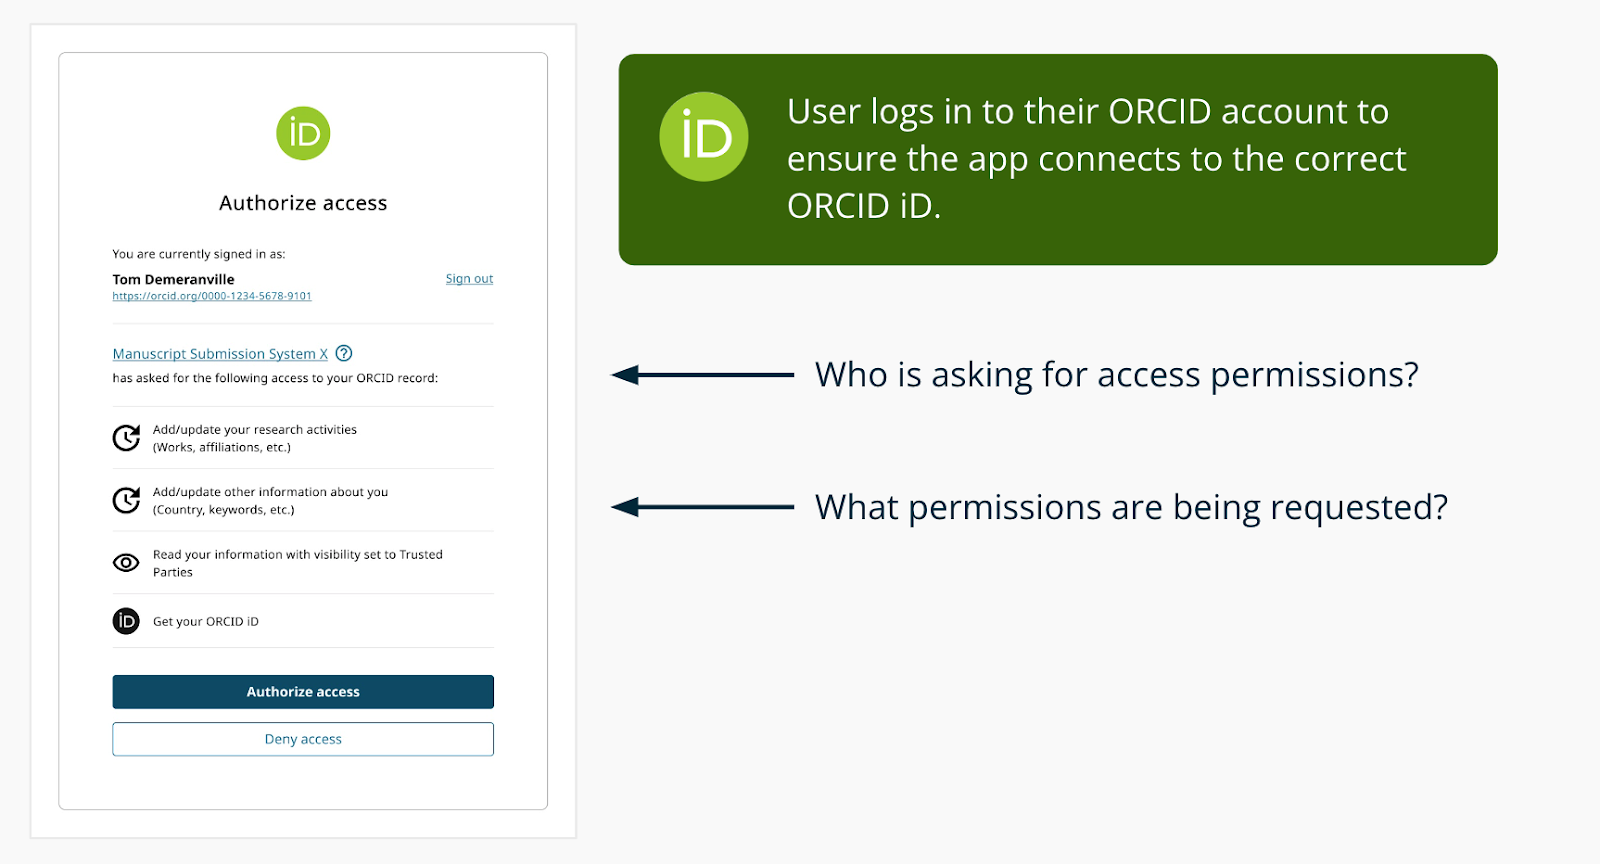 Image showing ORCID OAuth authorise screen with who is asking permission and what permissions they are requesting